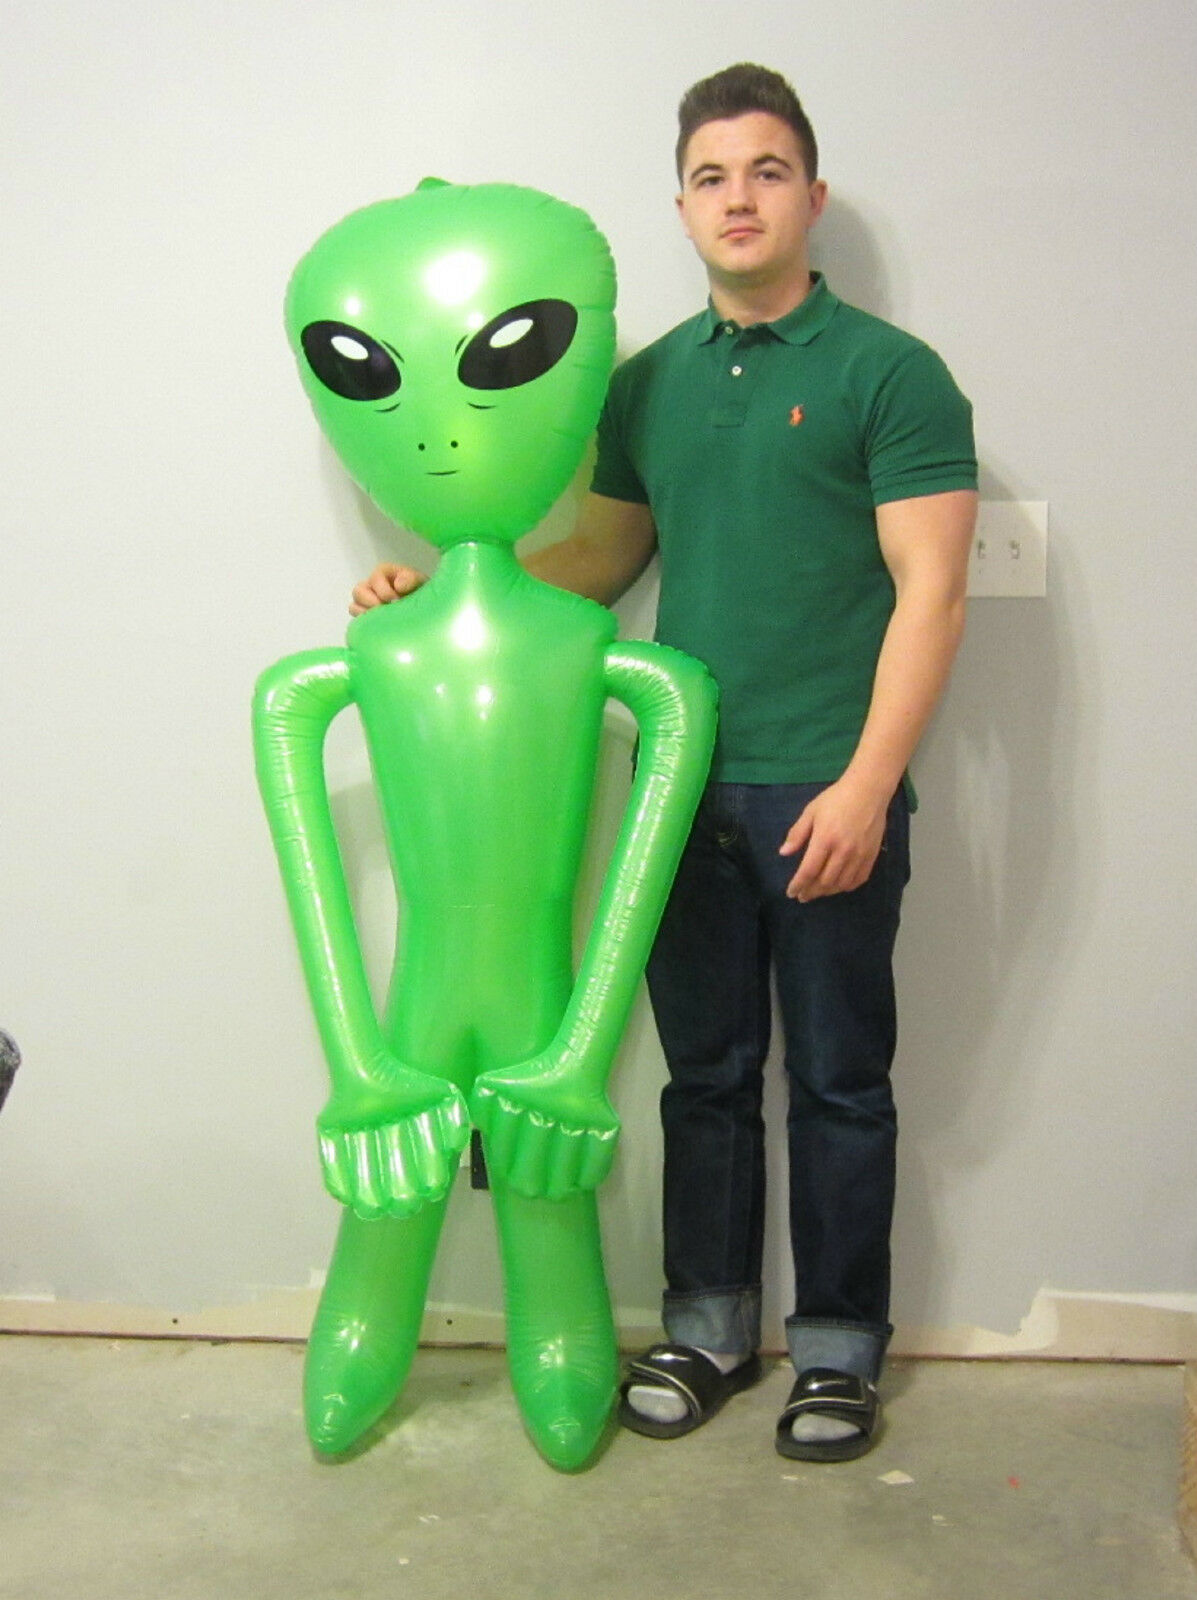 1 New Inflatable Green Space Alien 60" Blow Up Inflate Aliens Halloween Gag Gift